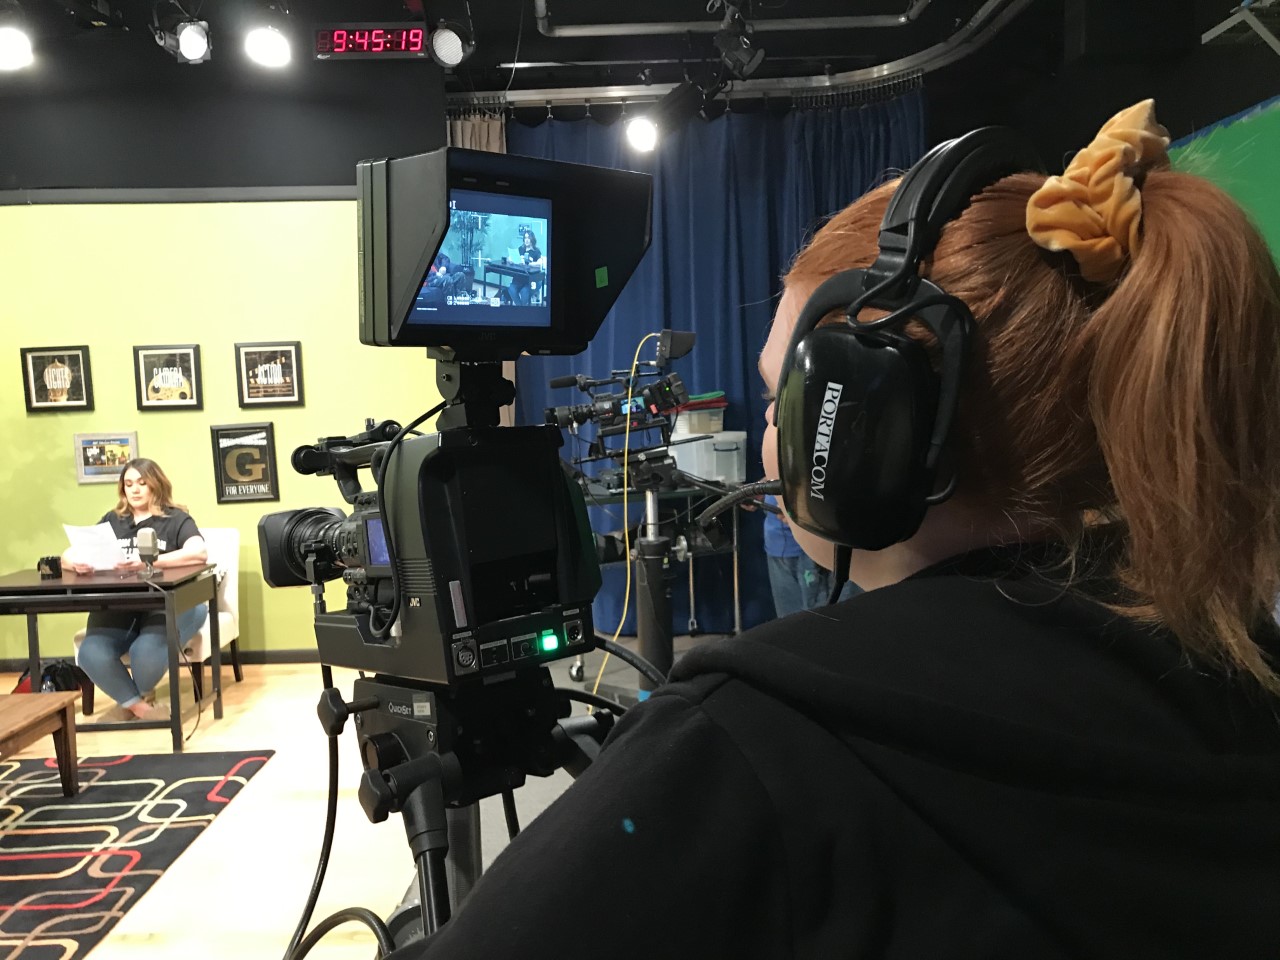 A person stands behind a camera with headphones on, recording the show